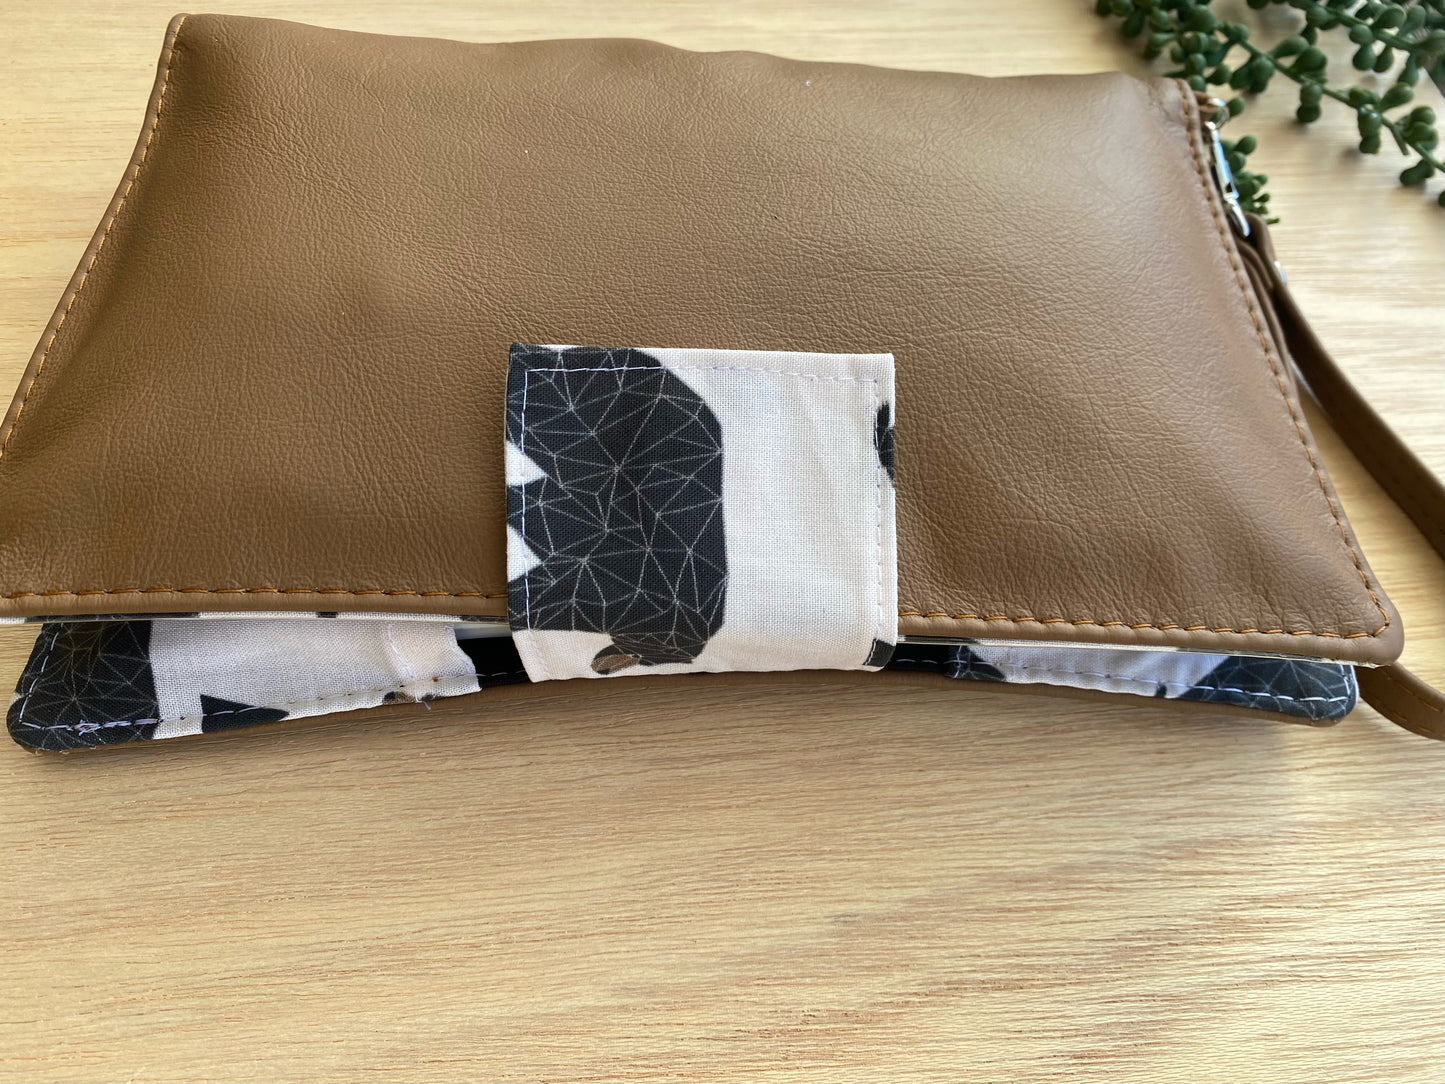 Leather Nappy Wallet